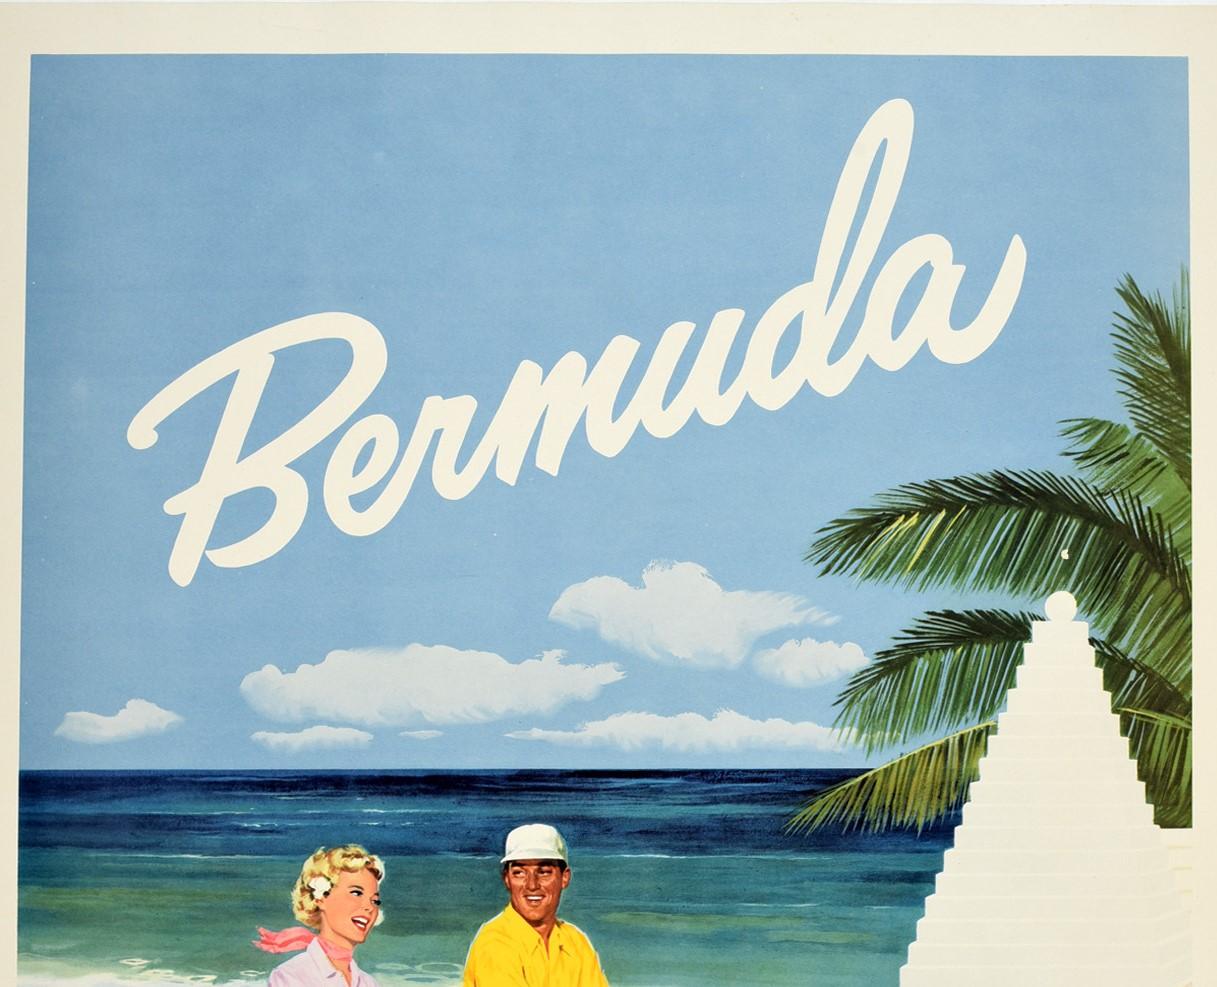 Original vintage travel poster for Bermuda featuring a great illustration of a smartly dressed man and lady wearing Bermuda shorts and smiling at each other as they ride their bikes along a seaside road behind pink flowers with people sunbathing